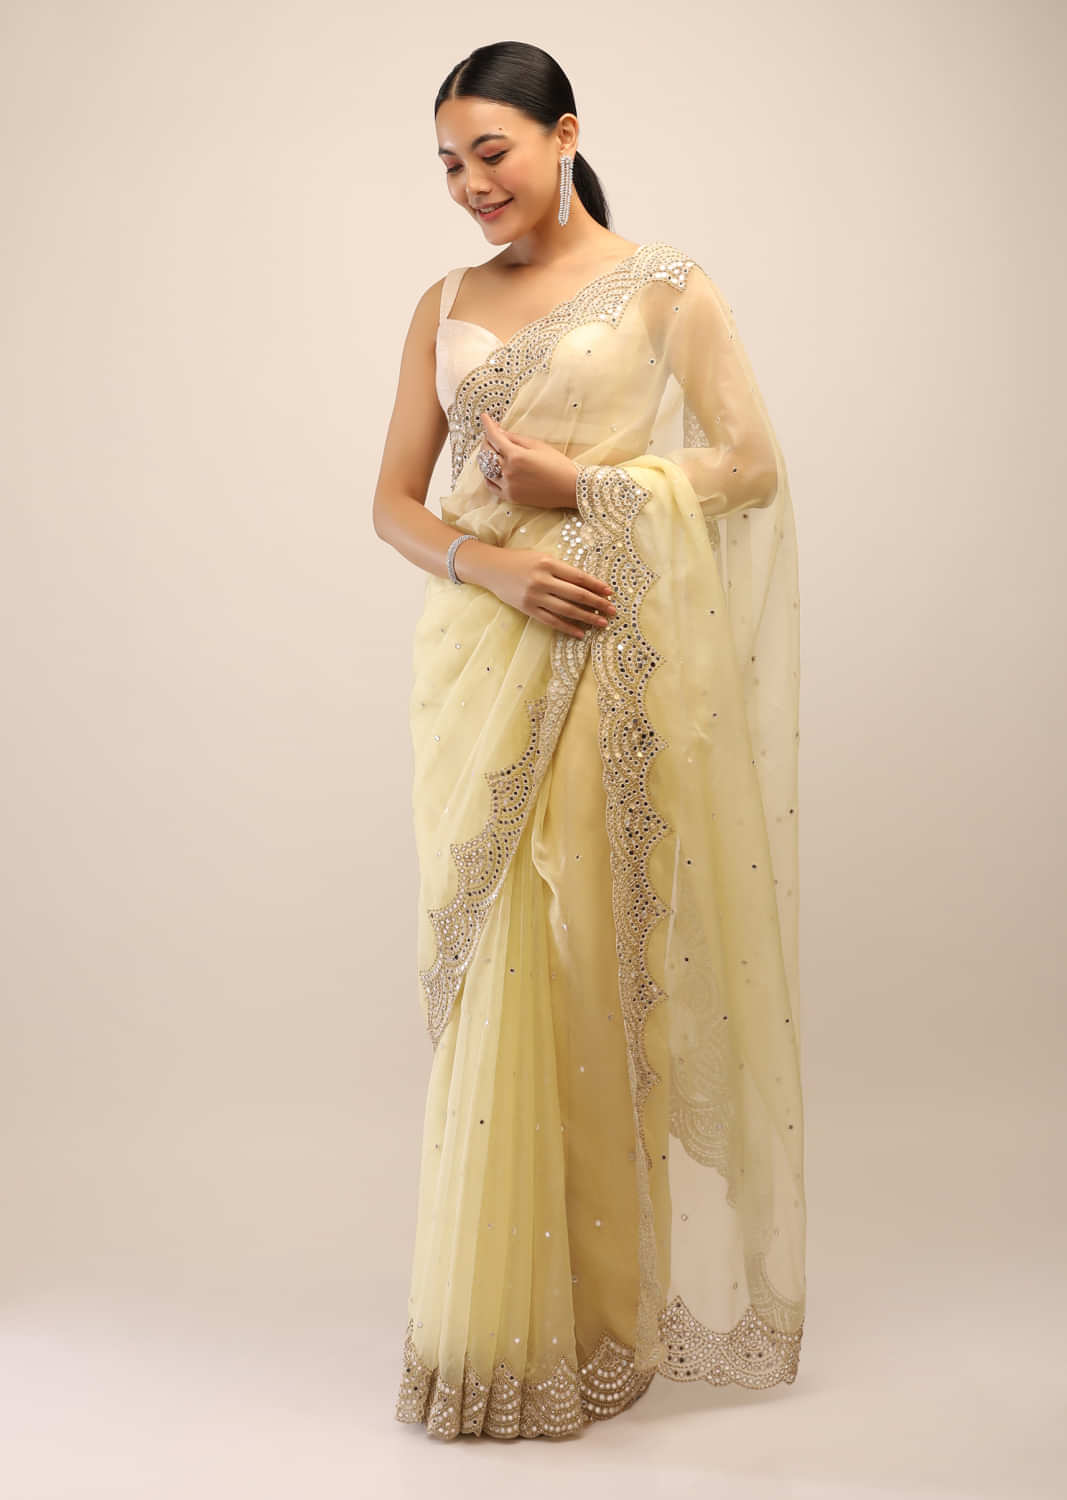 Powder Yellow Saree In Organza With Mirror Abla And Beads Embroidered Scallop Border And Buttis